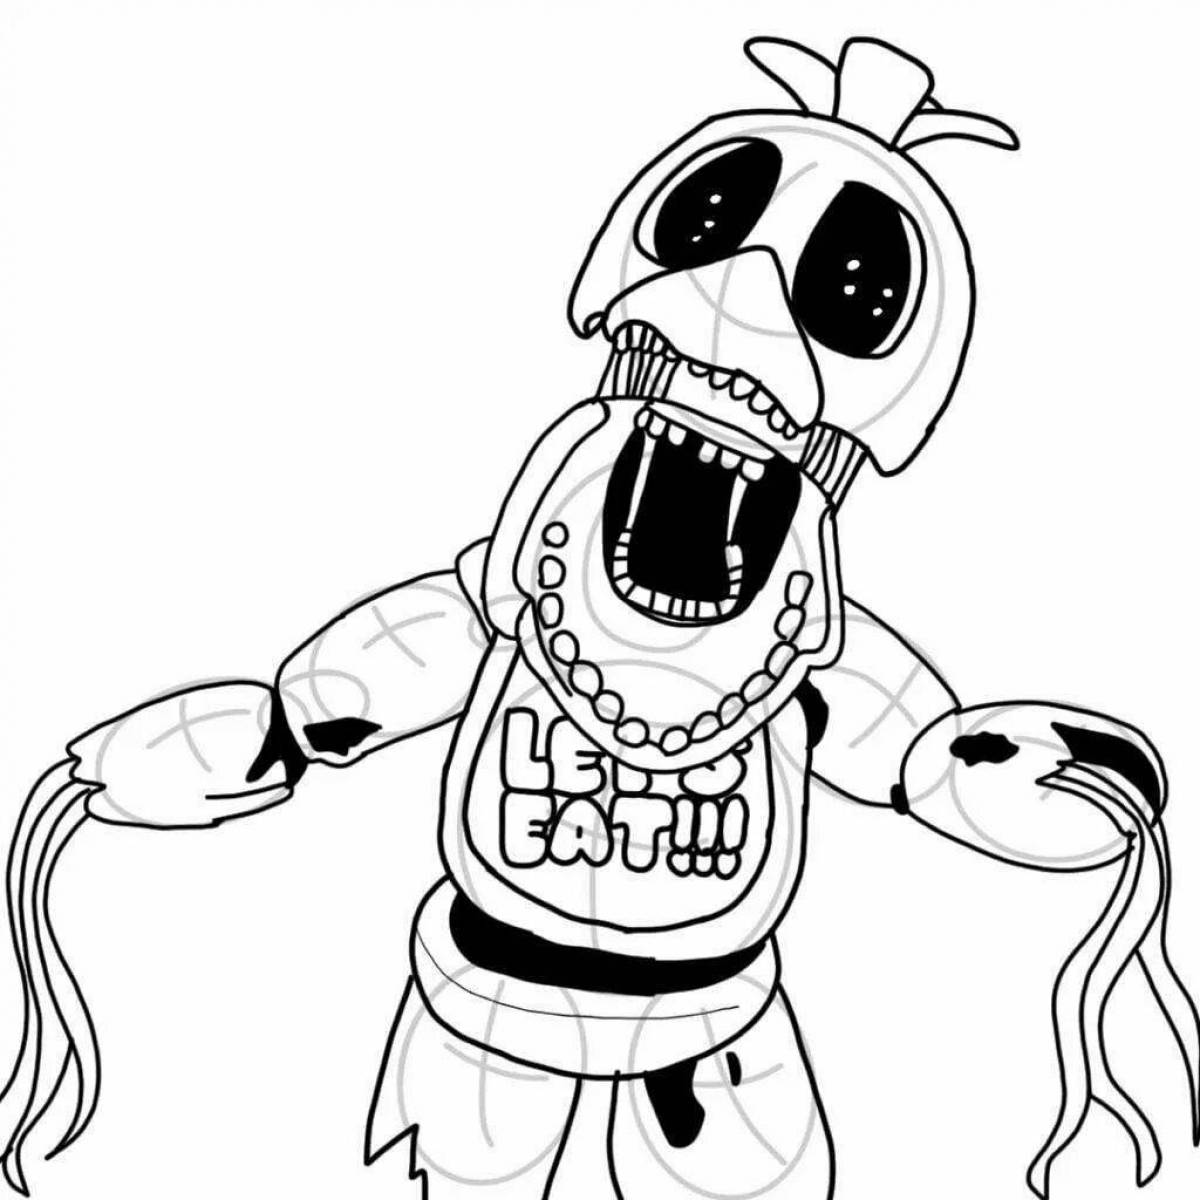 Colorful chica fnaf coloring page